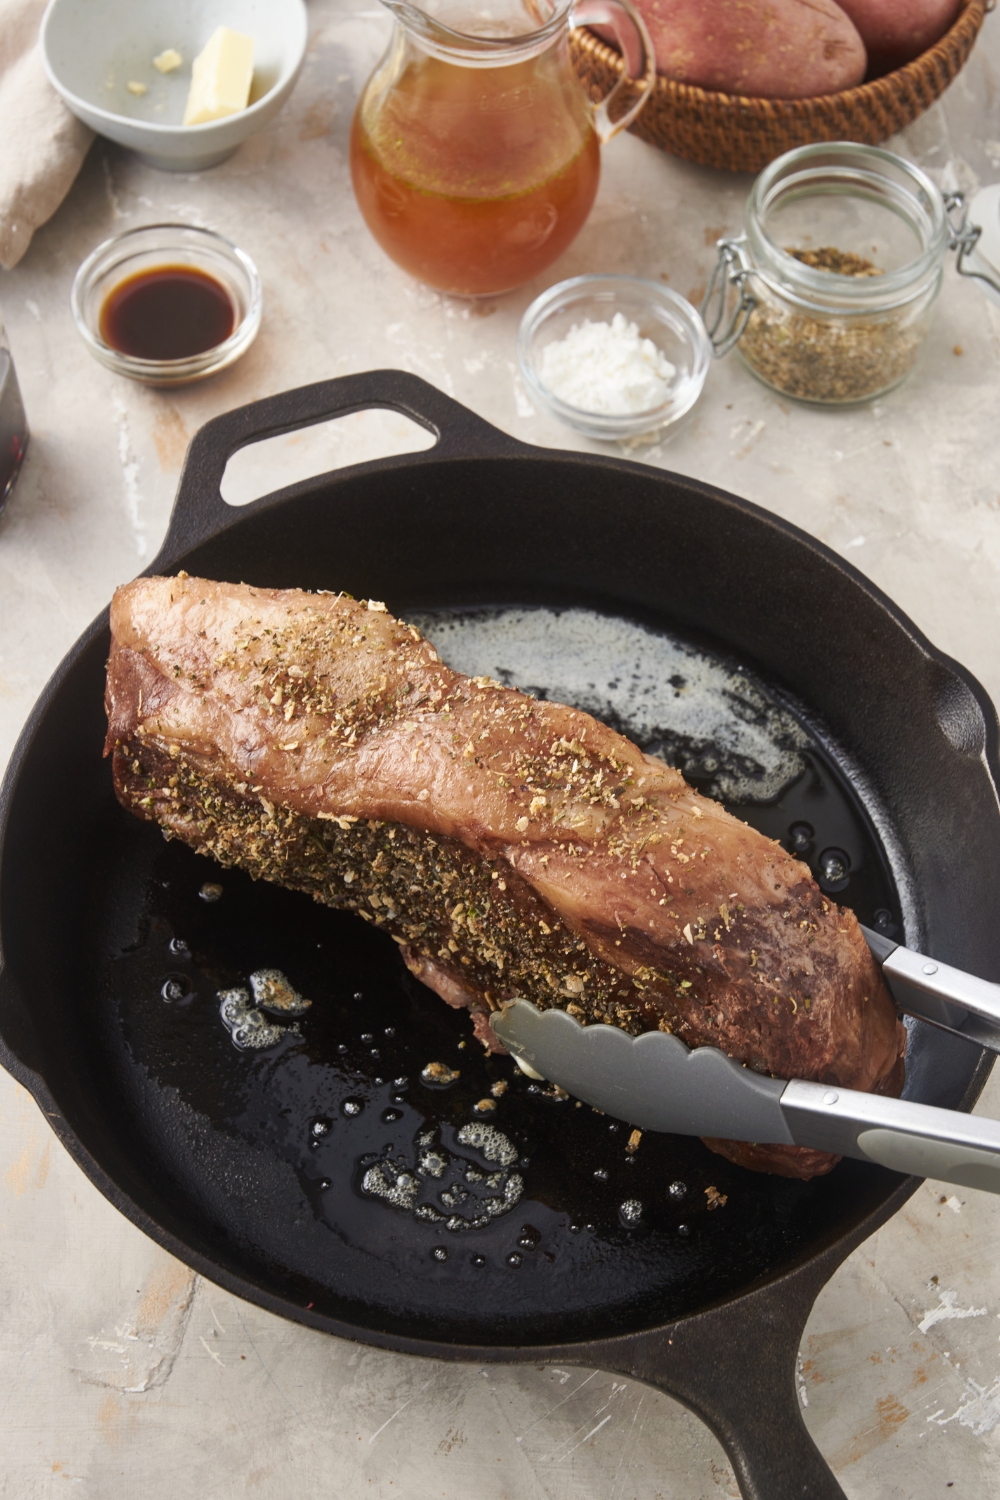 A prime rib being seared on one side in a cast iron skillet with a pair of tongs holding the steak upright.